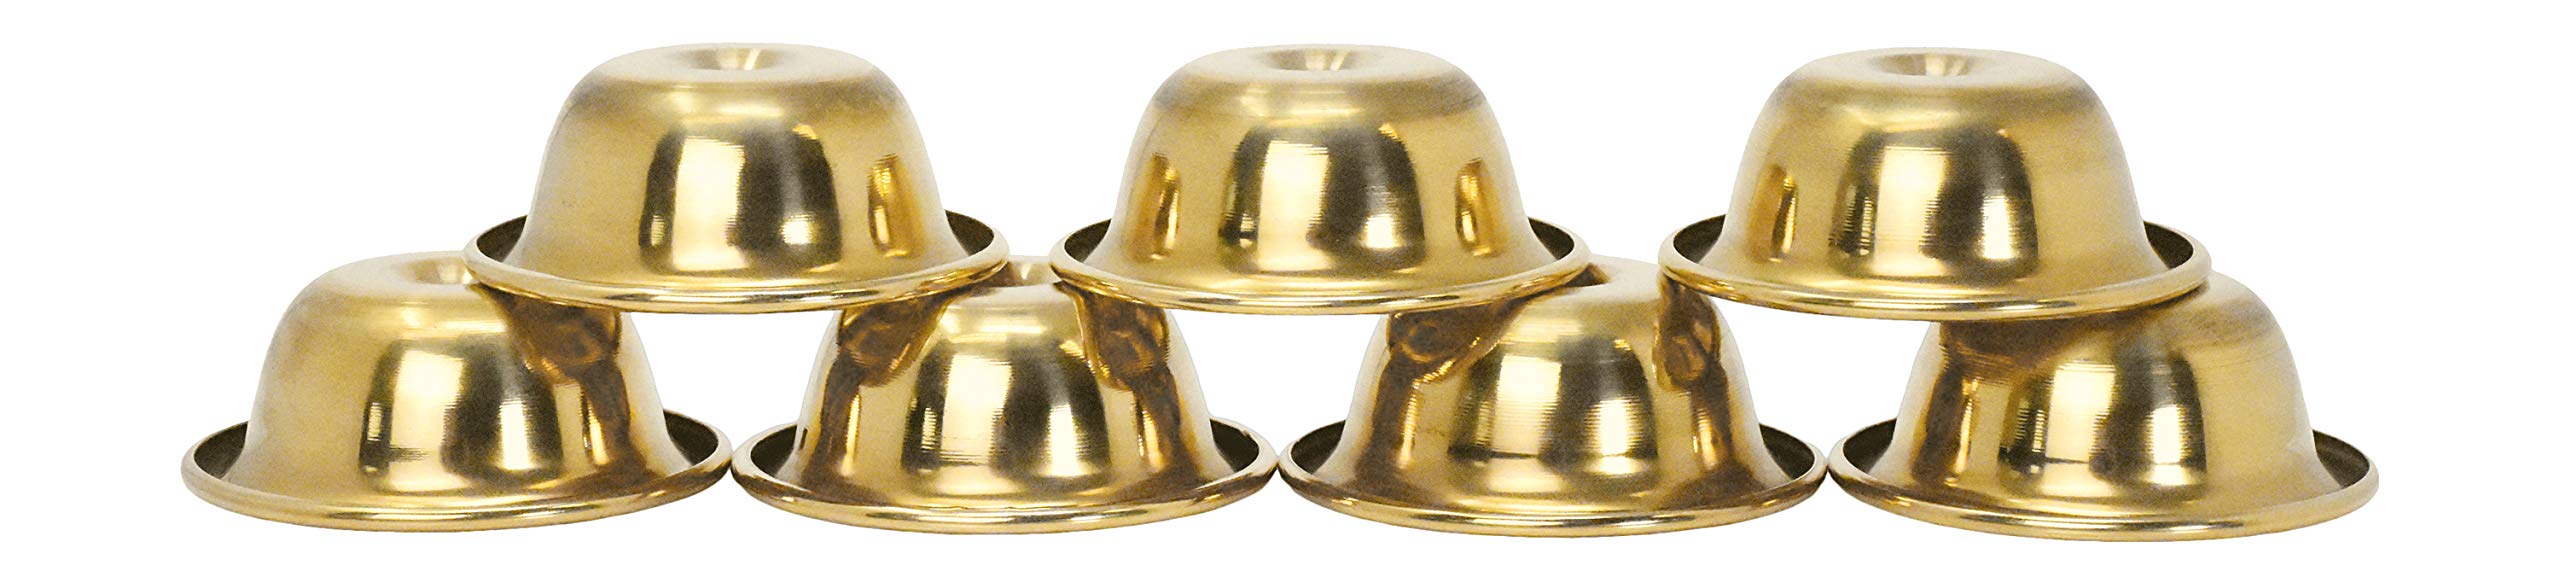 Brass Offering Bowl Set of 7 Tibetan Buddhist Alar Supplies for Meditation Yoga Burning Incense Ritual Smudging Decoration 3 Inches